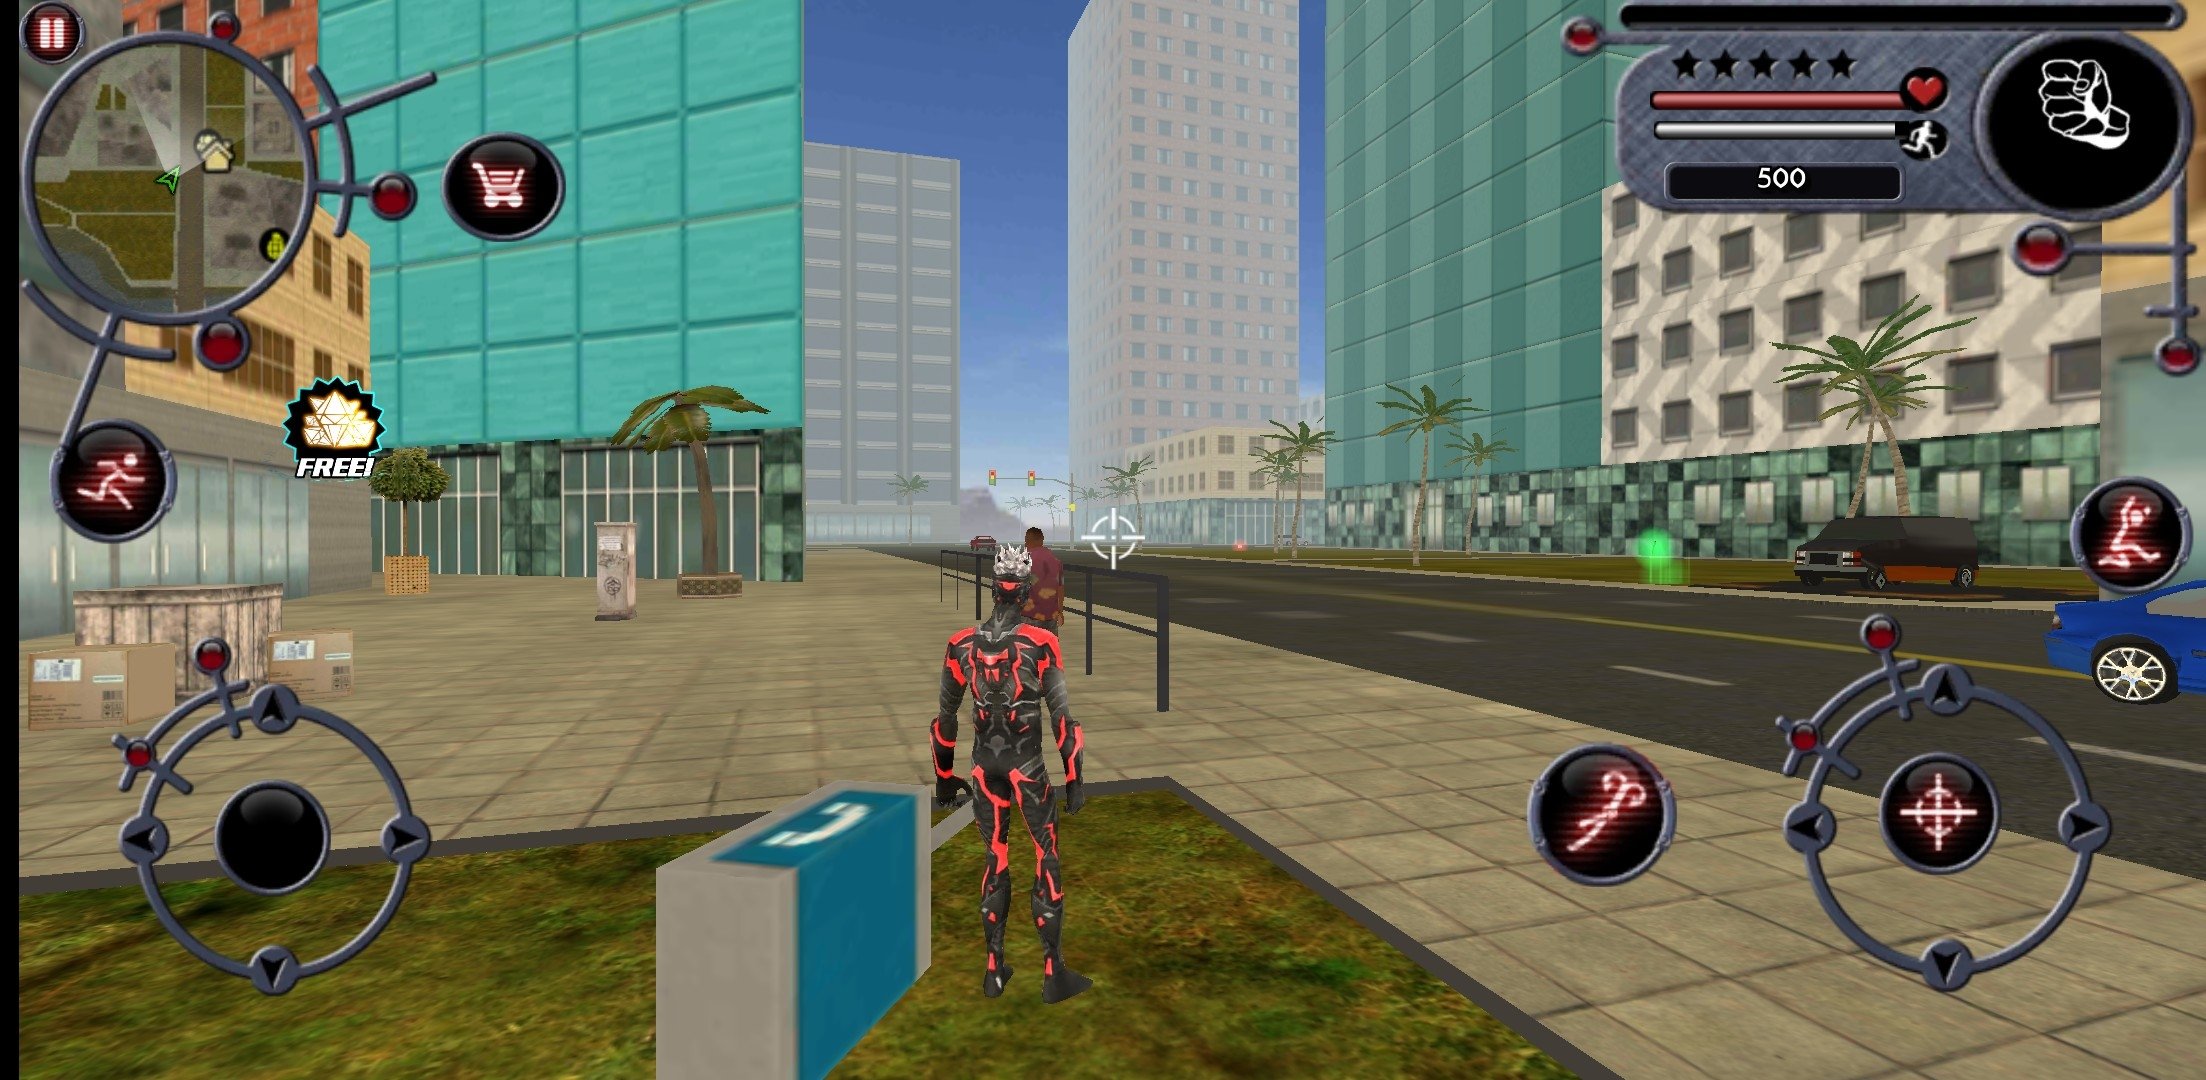 gta san andreas apk download for android 6.0.1